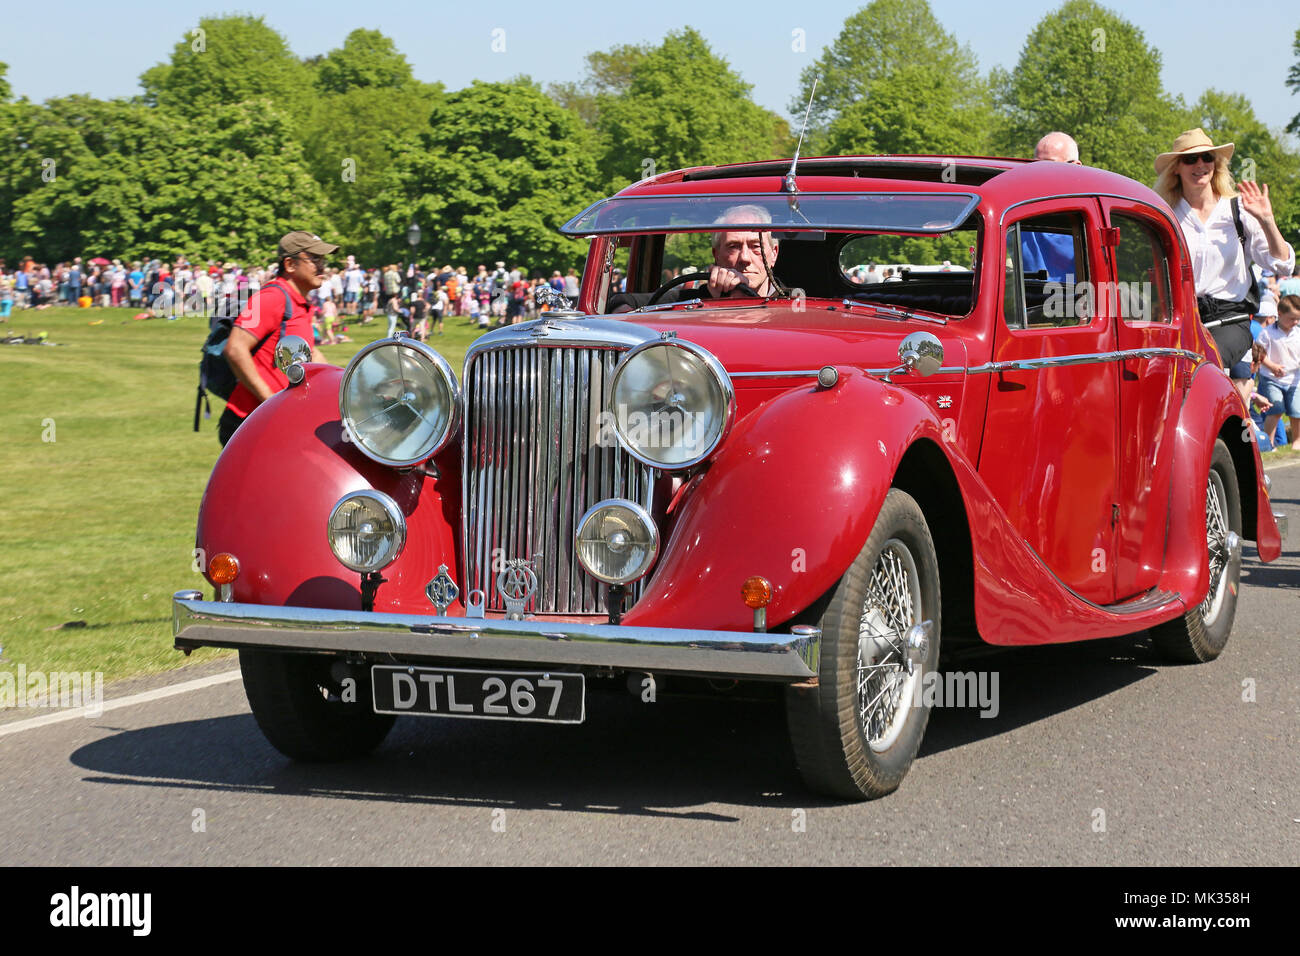 Jaguar MkIV 3.5 litre (1949). Chestnut Sunday, 6th May 2018. Bushy Park, Hampton Court, London Borough of Richmond upon Thames, England, Great Britain, United Kingdom, UK, Europe. Vintage and classic vehicle parade and displays with fairground attractions and military reenactments. Credit: Ian Bottle/Alamy Live News Stock Photo